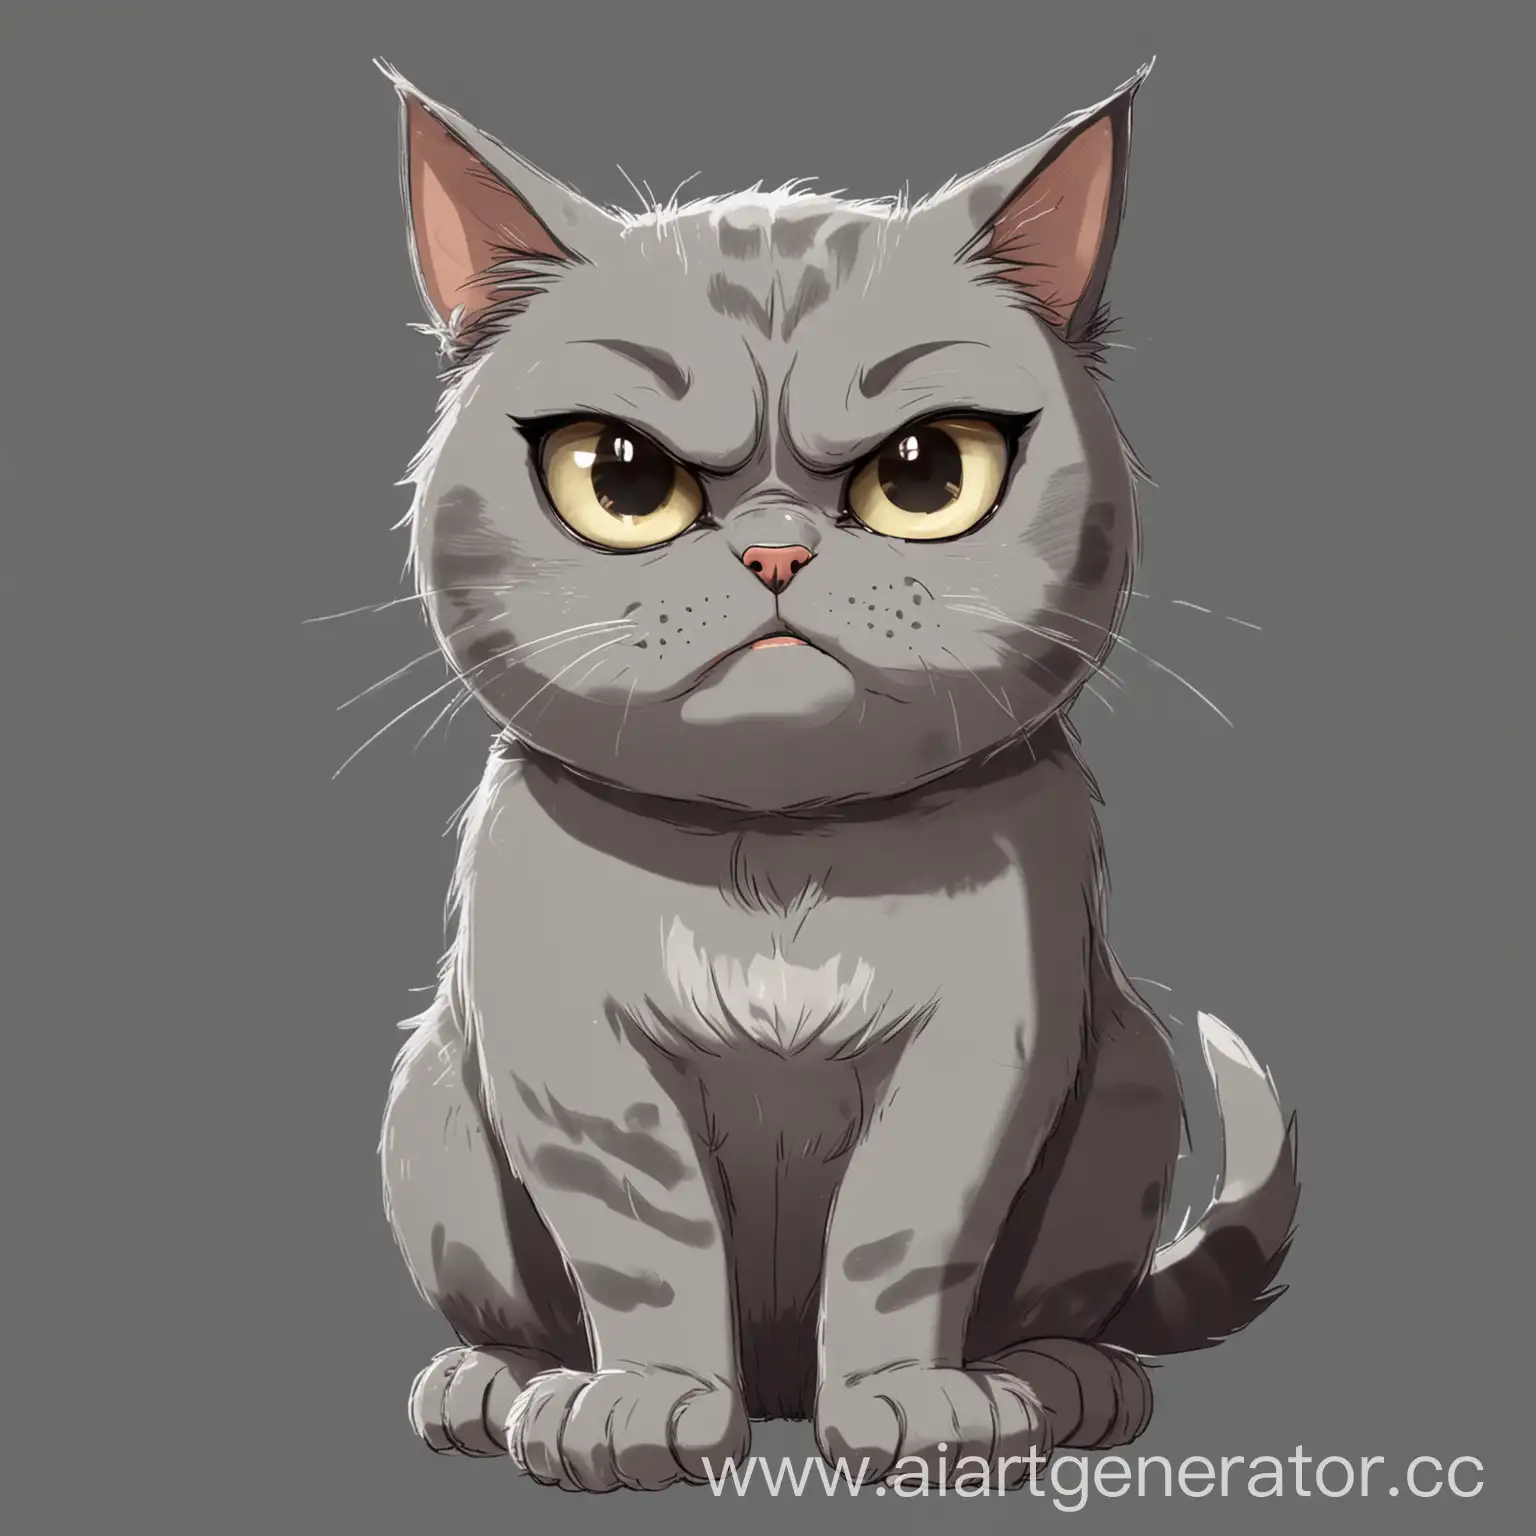 Disgruntled-Gray-Cat-in-Cartoon-Anime-Style-Looking-at-the-Camera